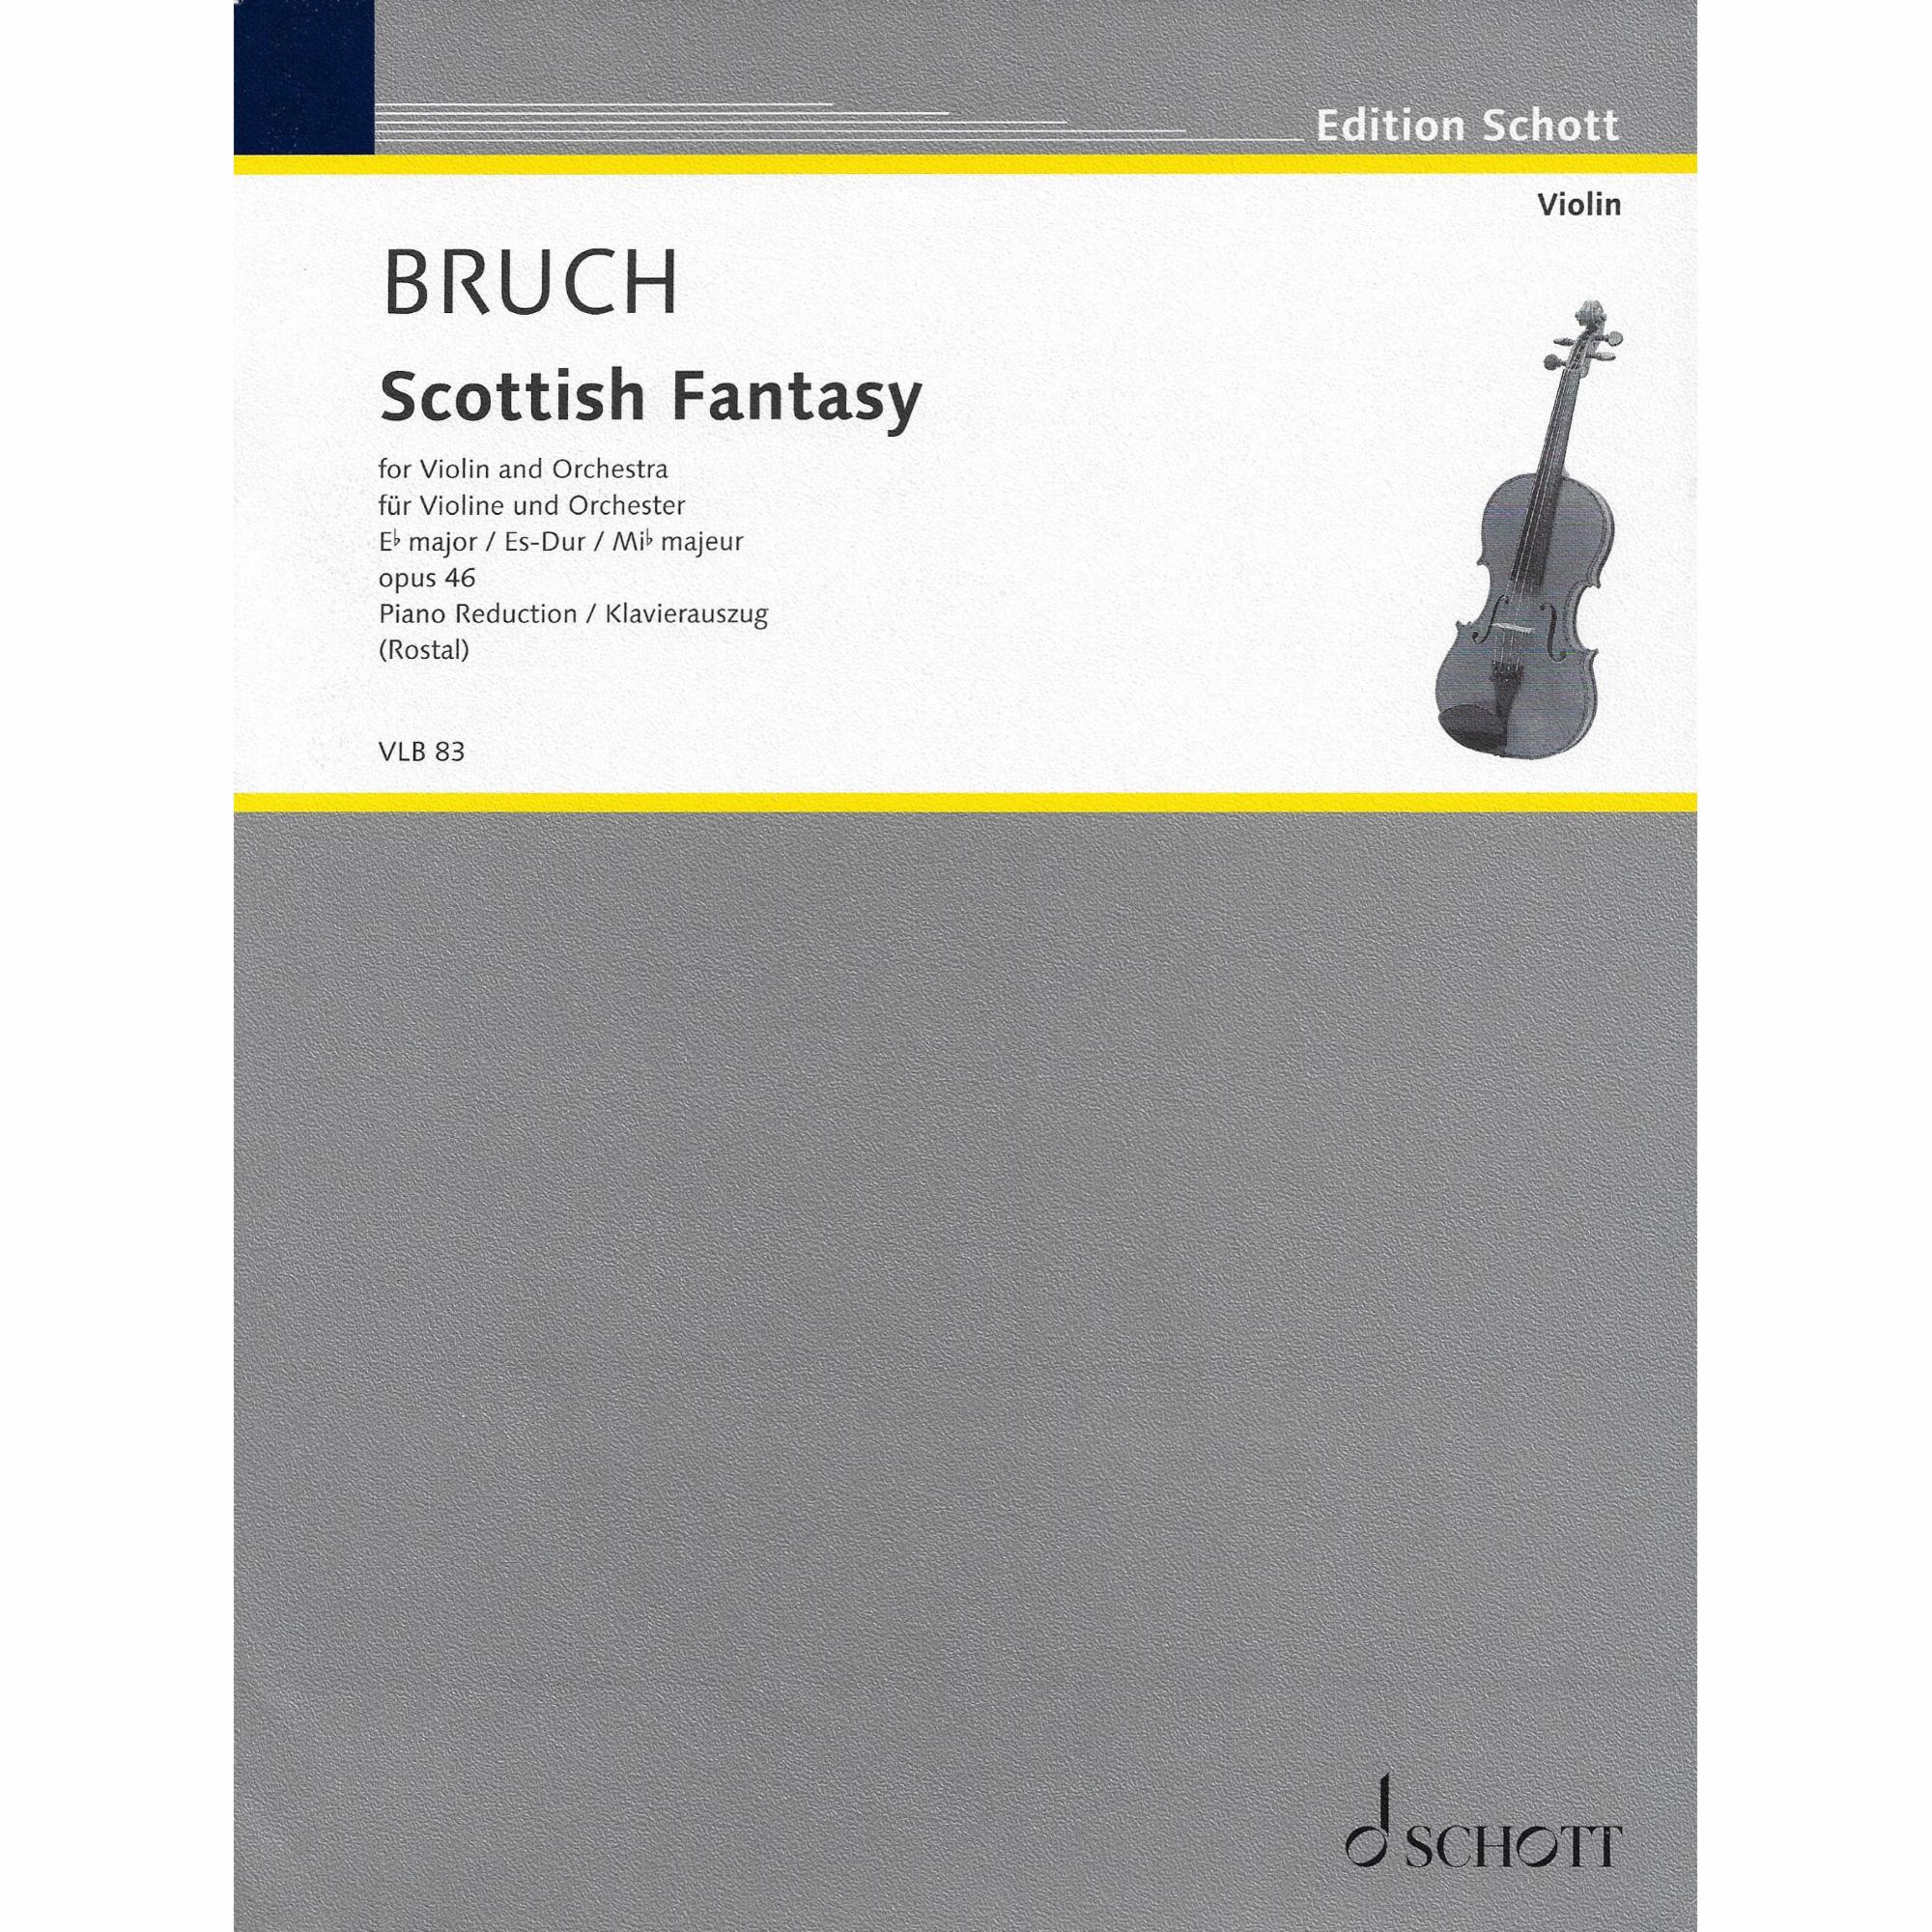 Bruch -- Scottish Fantasy in E-flat Major, Op. 46 for Violin and Piano